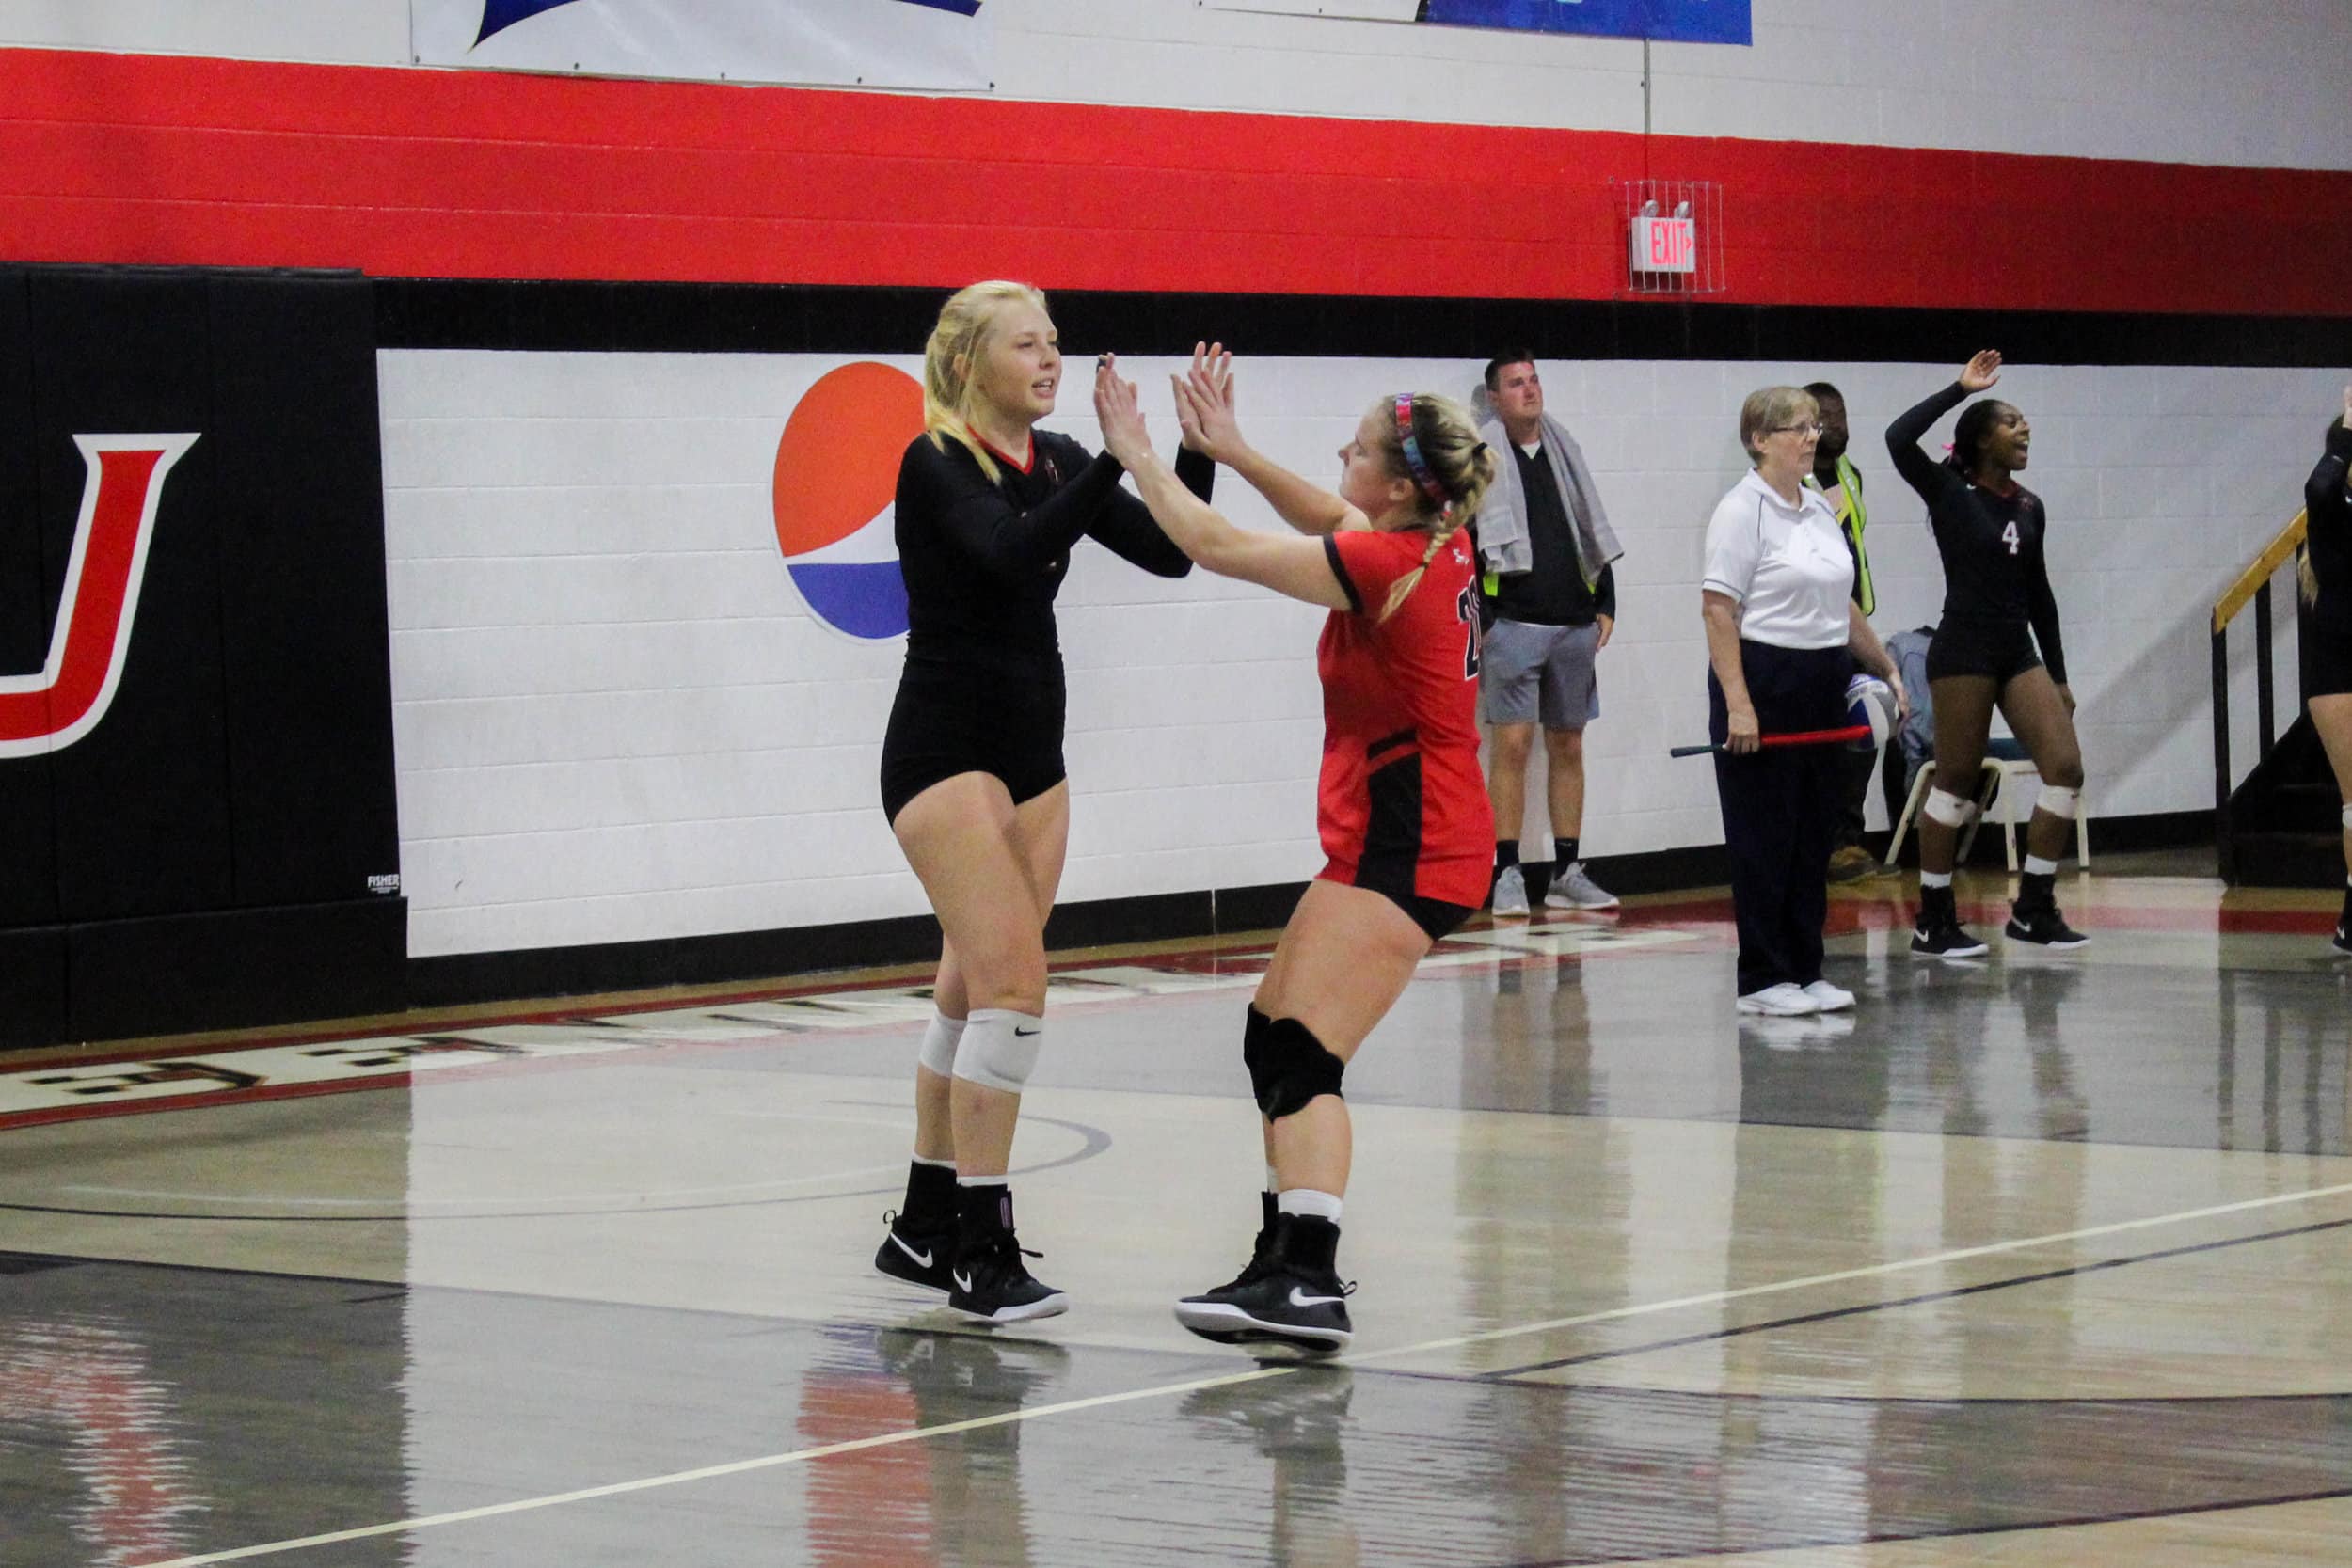 Freshman Whitley Kahler (20) congratulates senior Sara Miller (11) after Miller served a ball that resulted in a point for NGU.